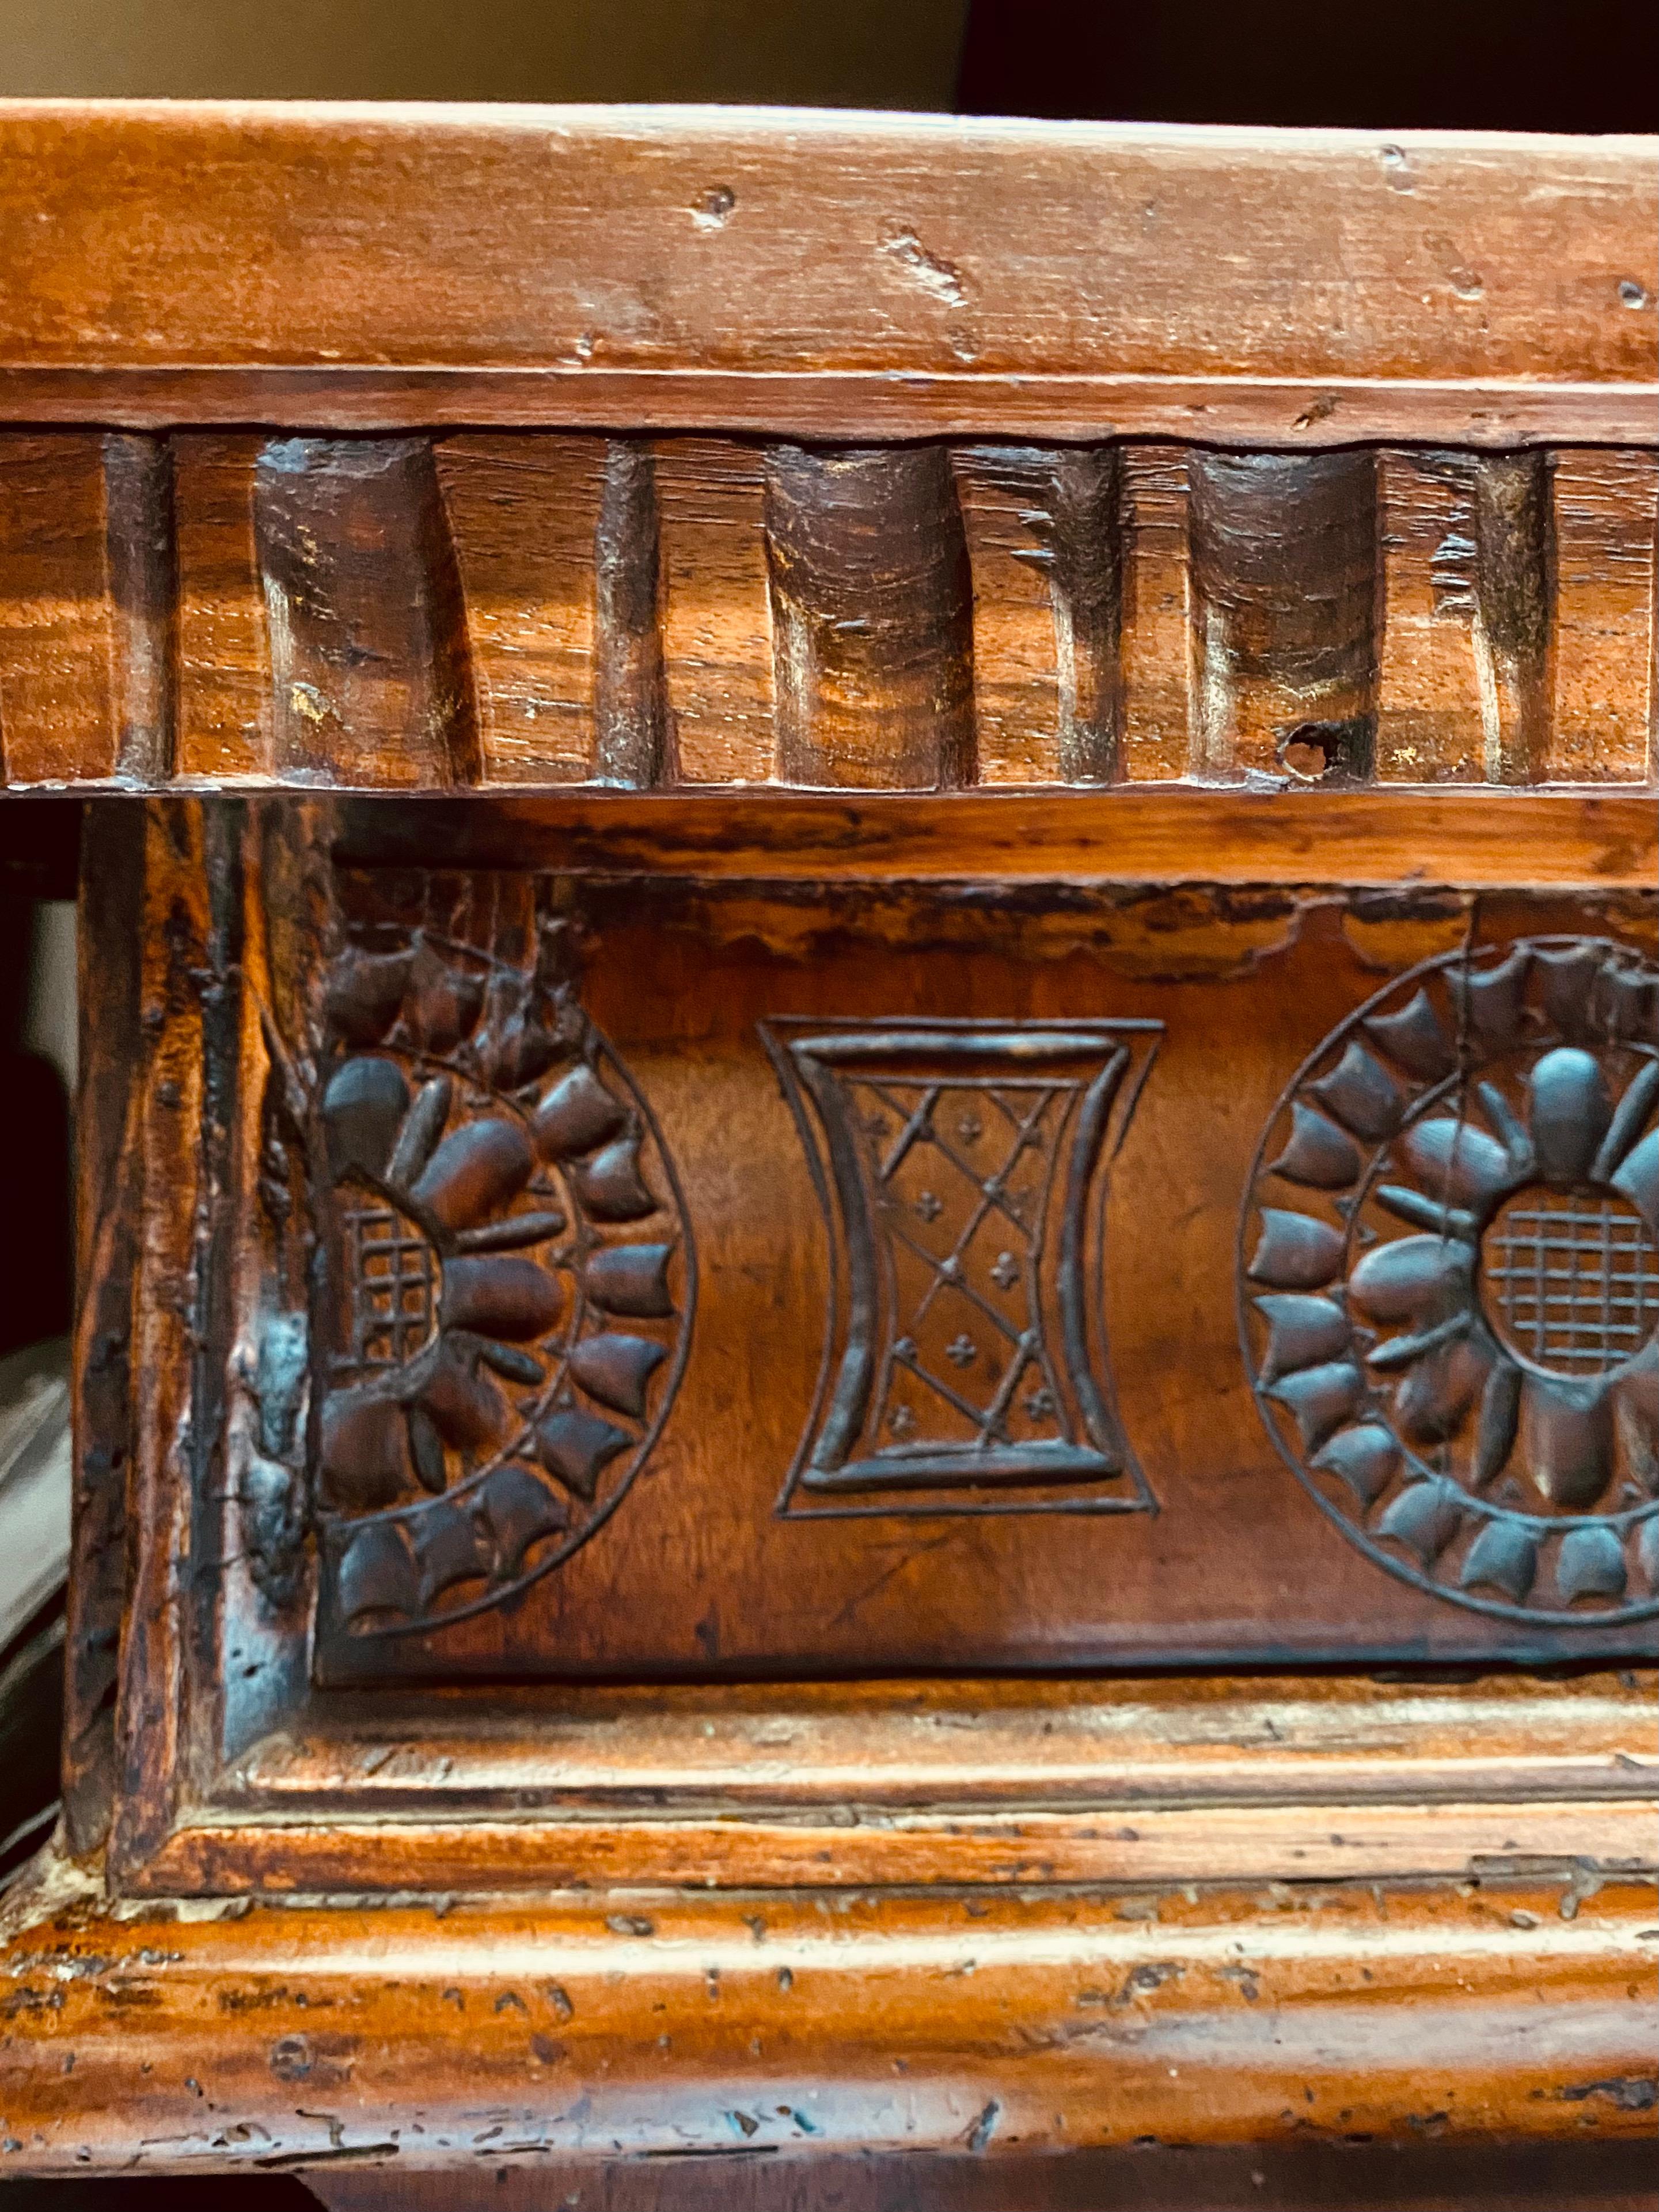 Portuguese 17th Cent. Portugese Chip Carved Desk, w. Portraits of Royalty on top and sides